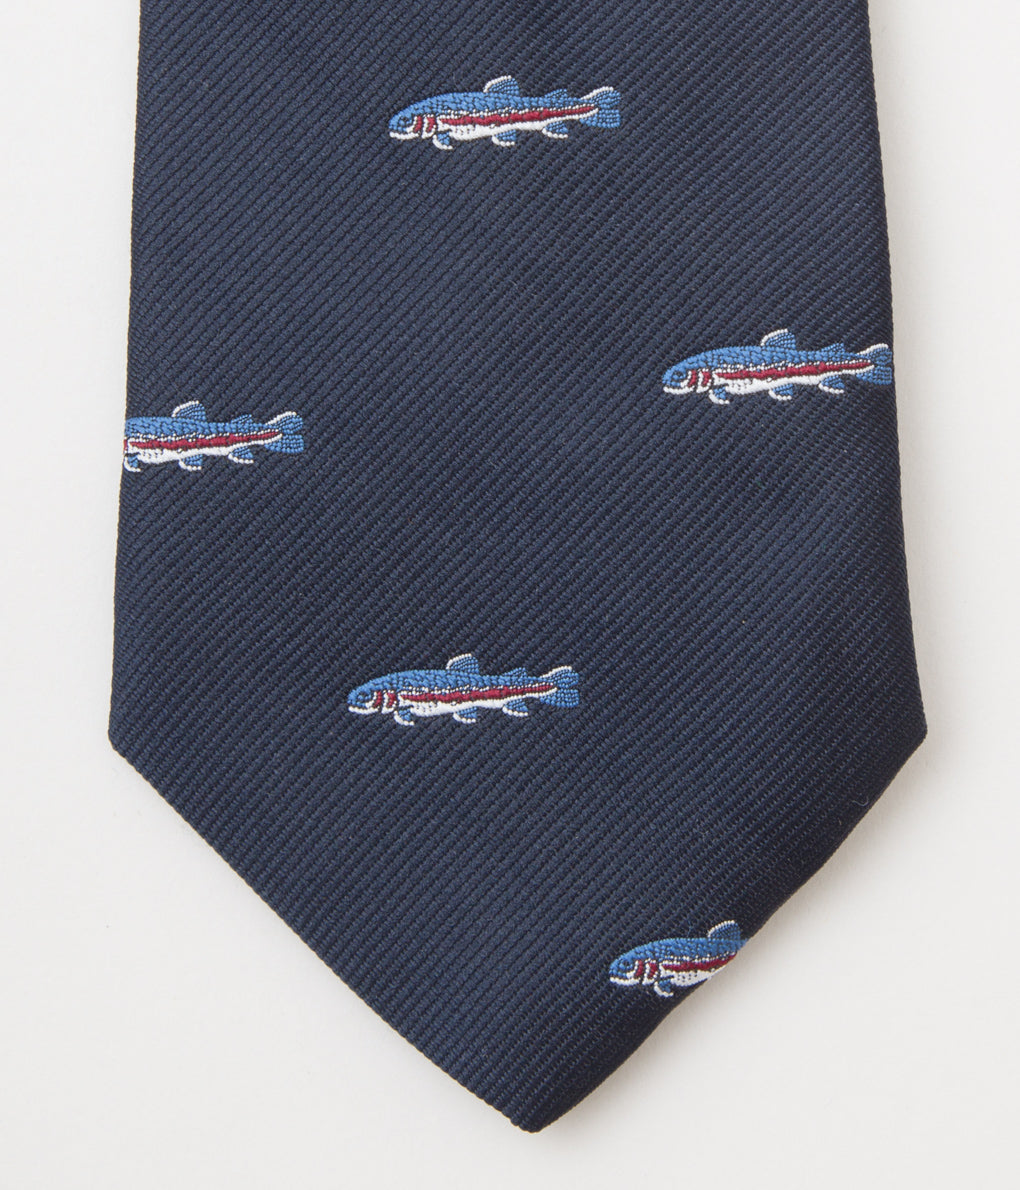 FROM USA "O'CONELL LUCAS-CHELF EMBROIDERED TIE BLUE FISH"(NAVY)